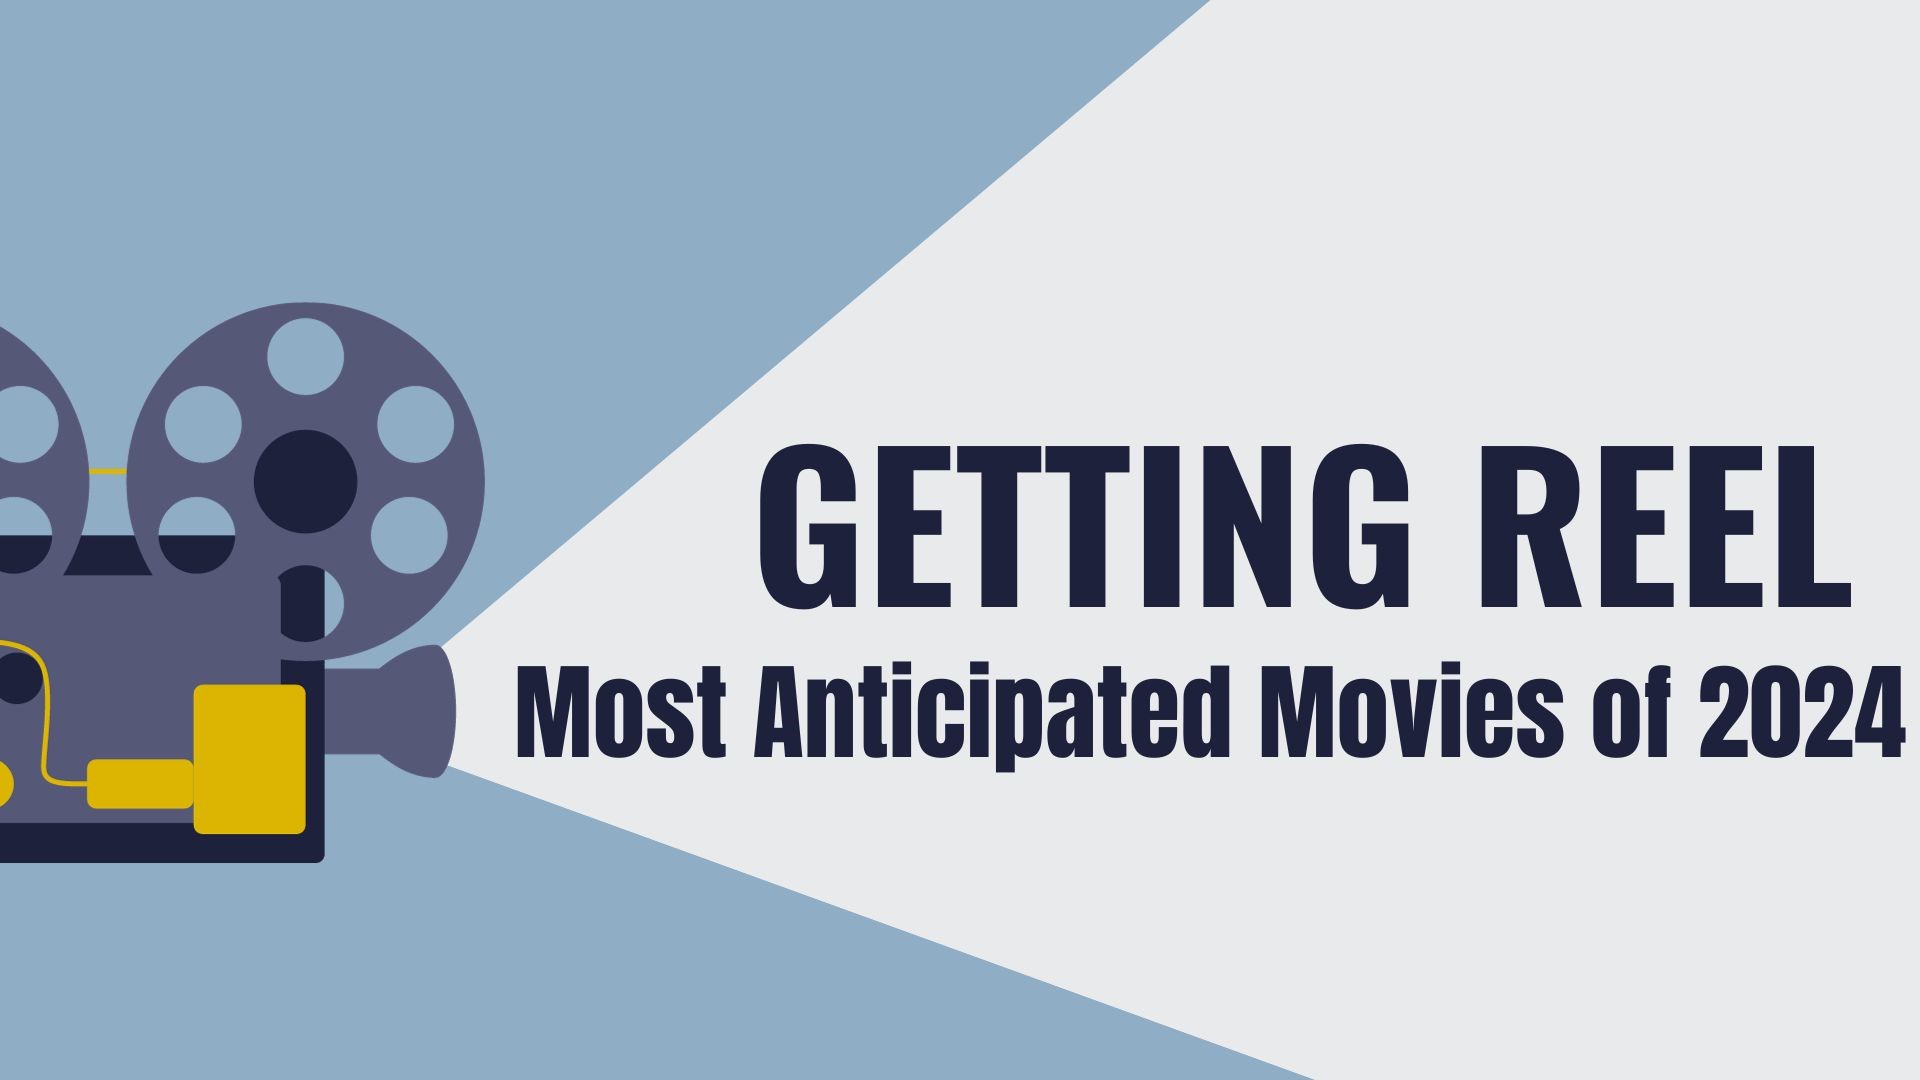 Getting Reel takes a look ahead of the most anticipated movies of 2024.